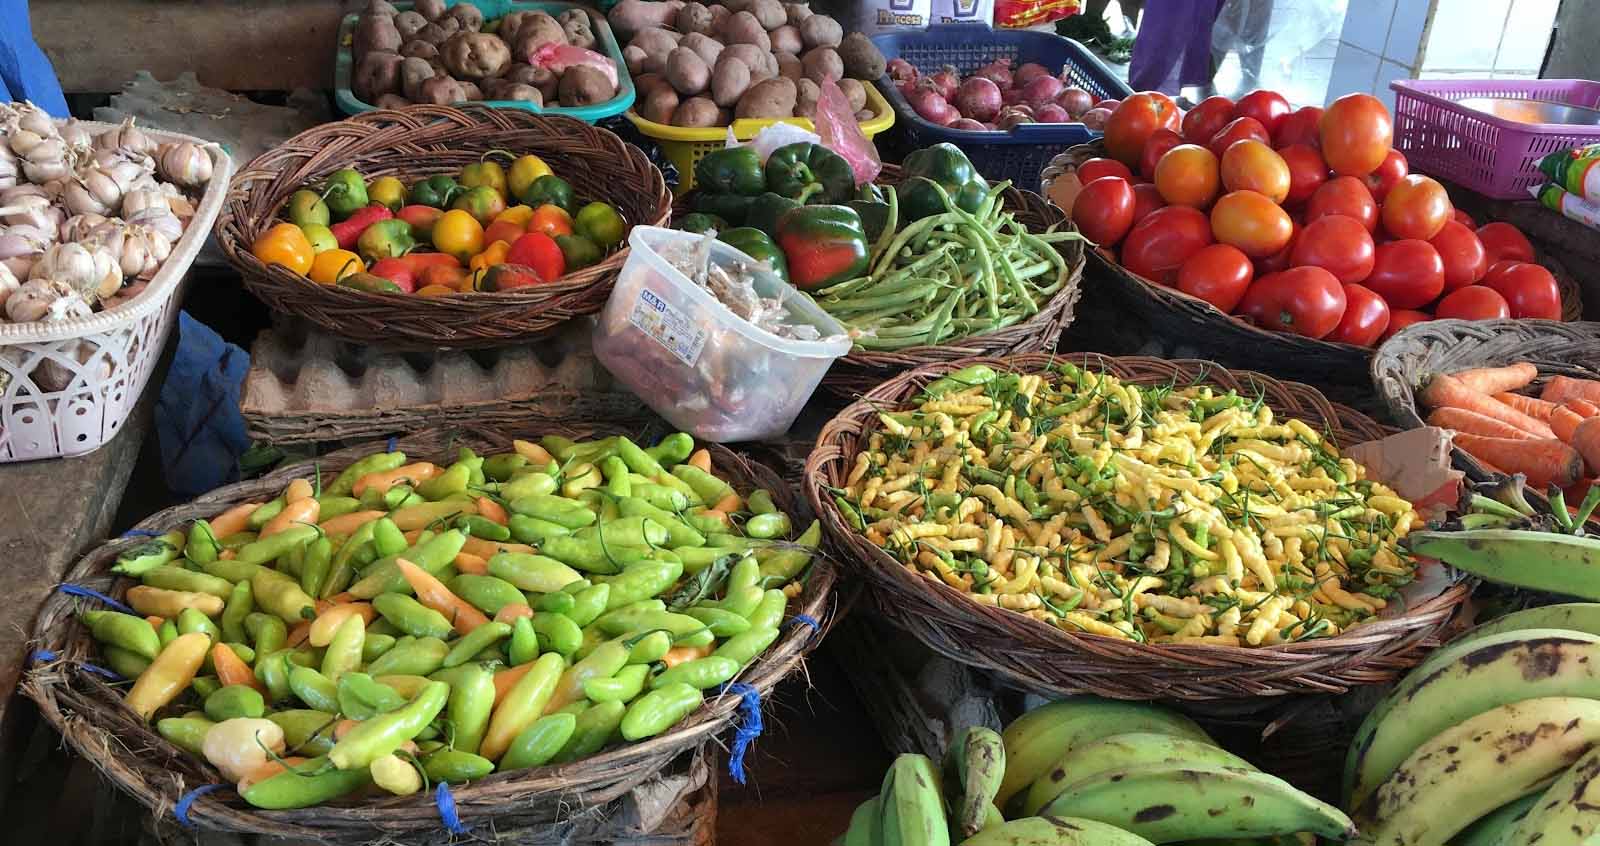 Assorted fresh vegetables and fruits displayed in baskets at a market stall.